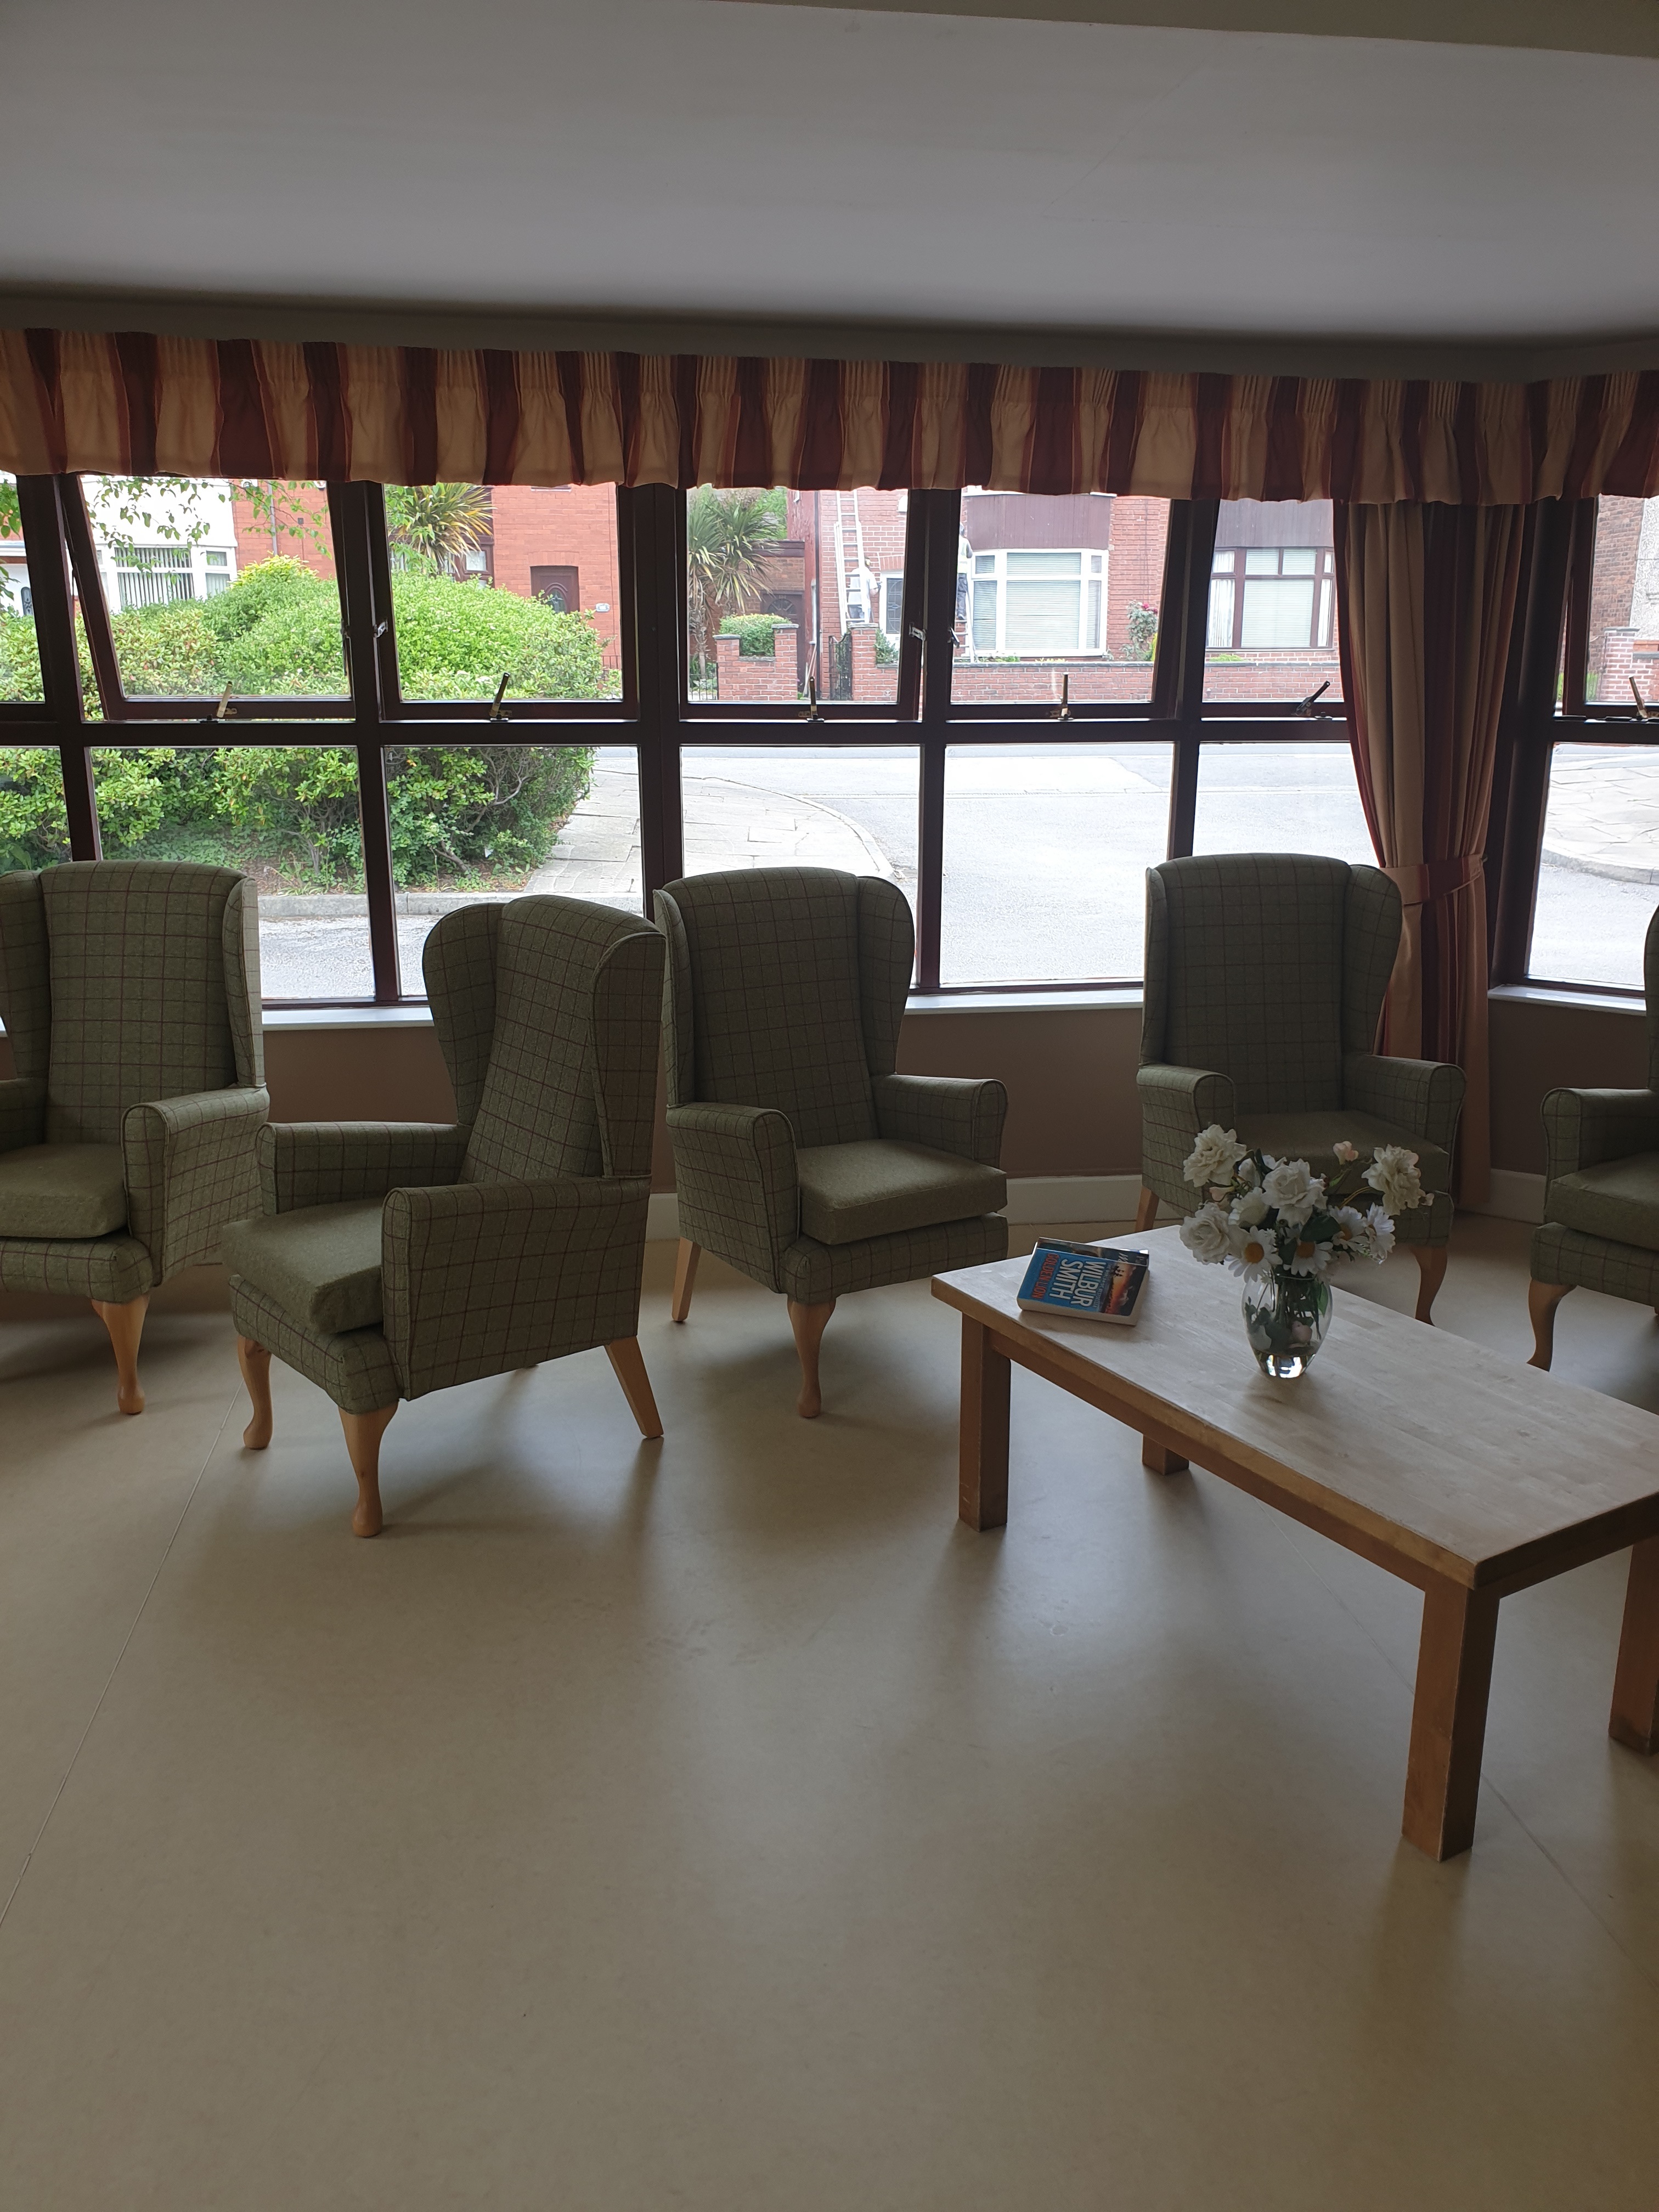 Lounge down May 19 EC: Key Healthcare is dedicated to caring for elderly residents in safe. We have multiple dementia care homes including our care home middlesbrough, our care home St. Helen and care home saltburn. We excel in monitoring and improving care levels.